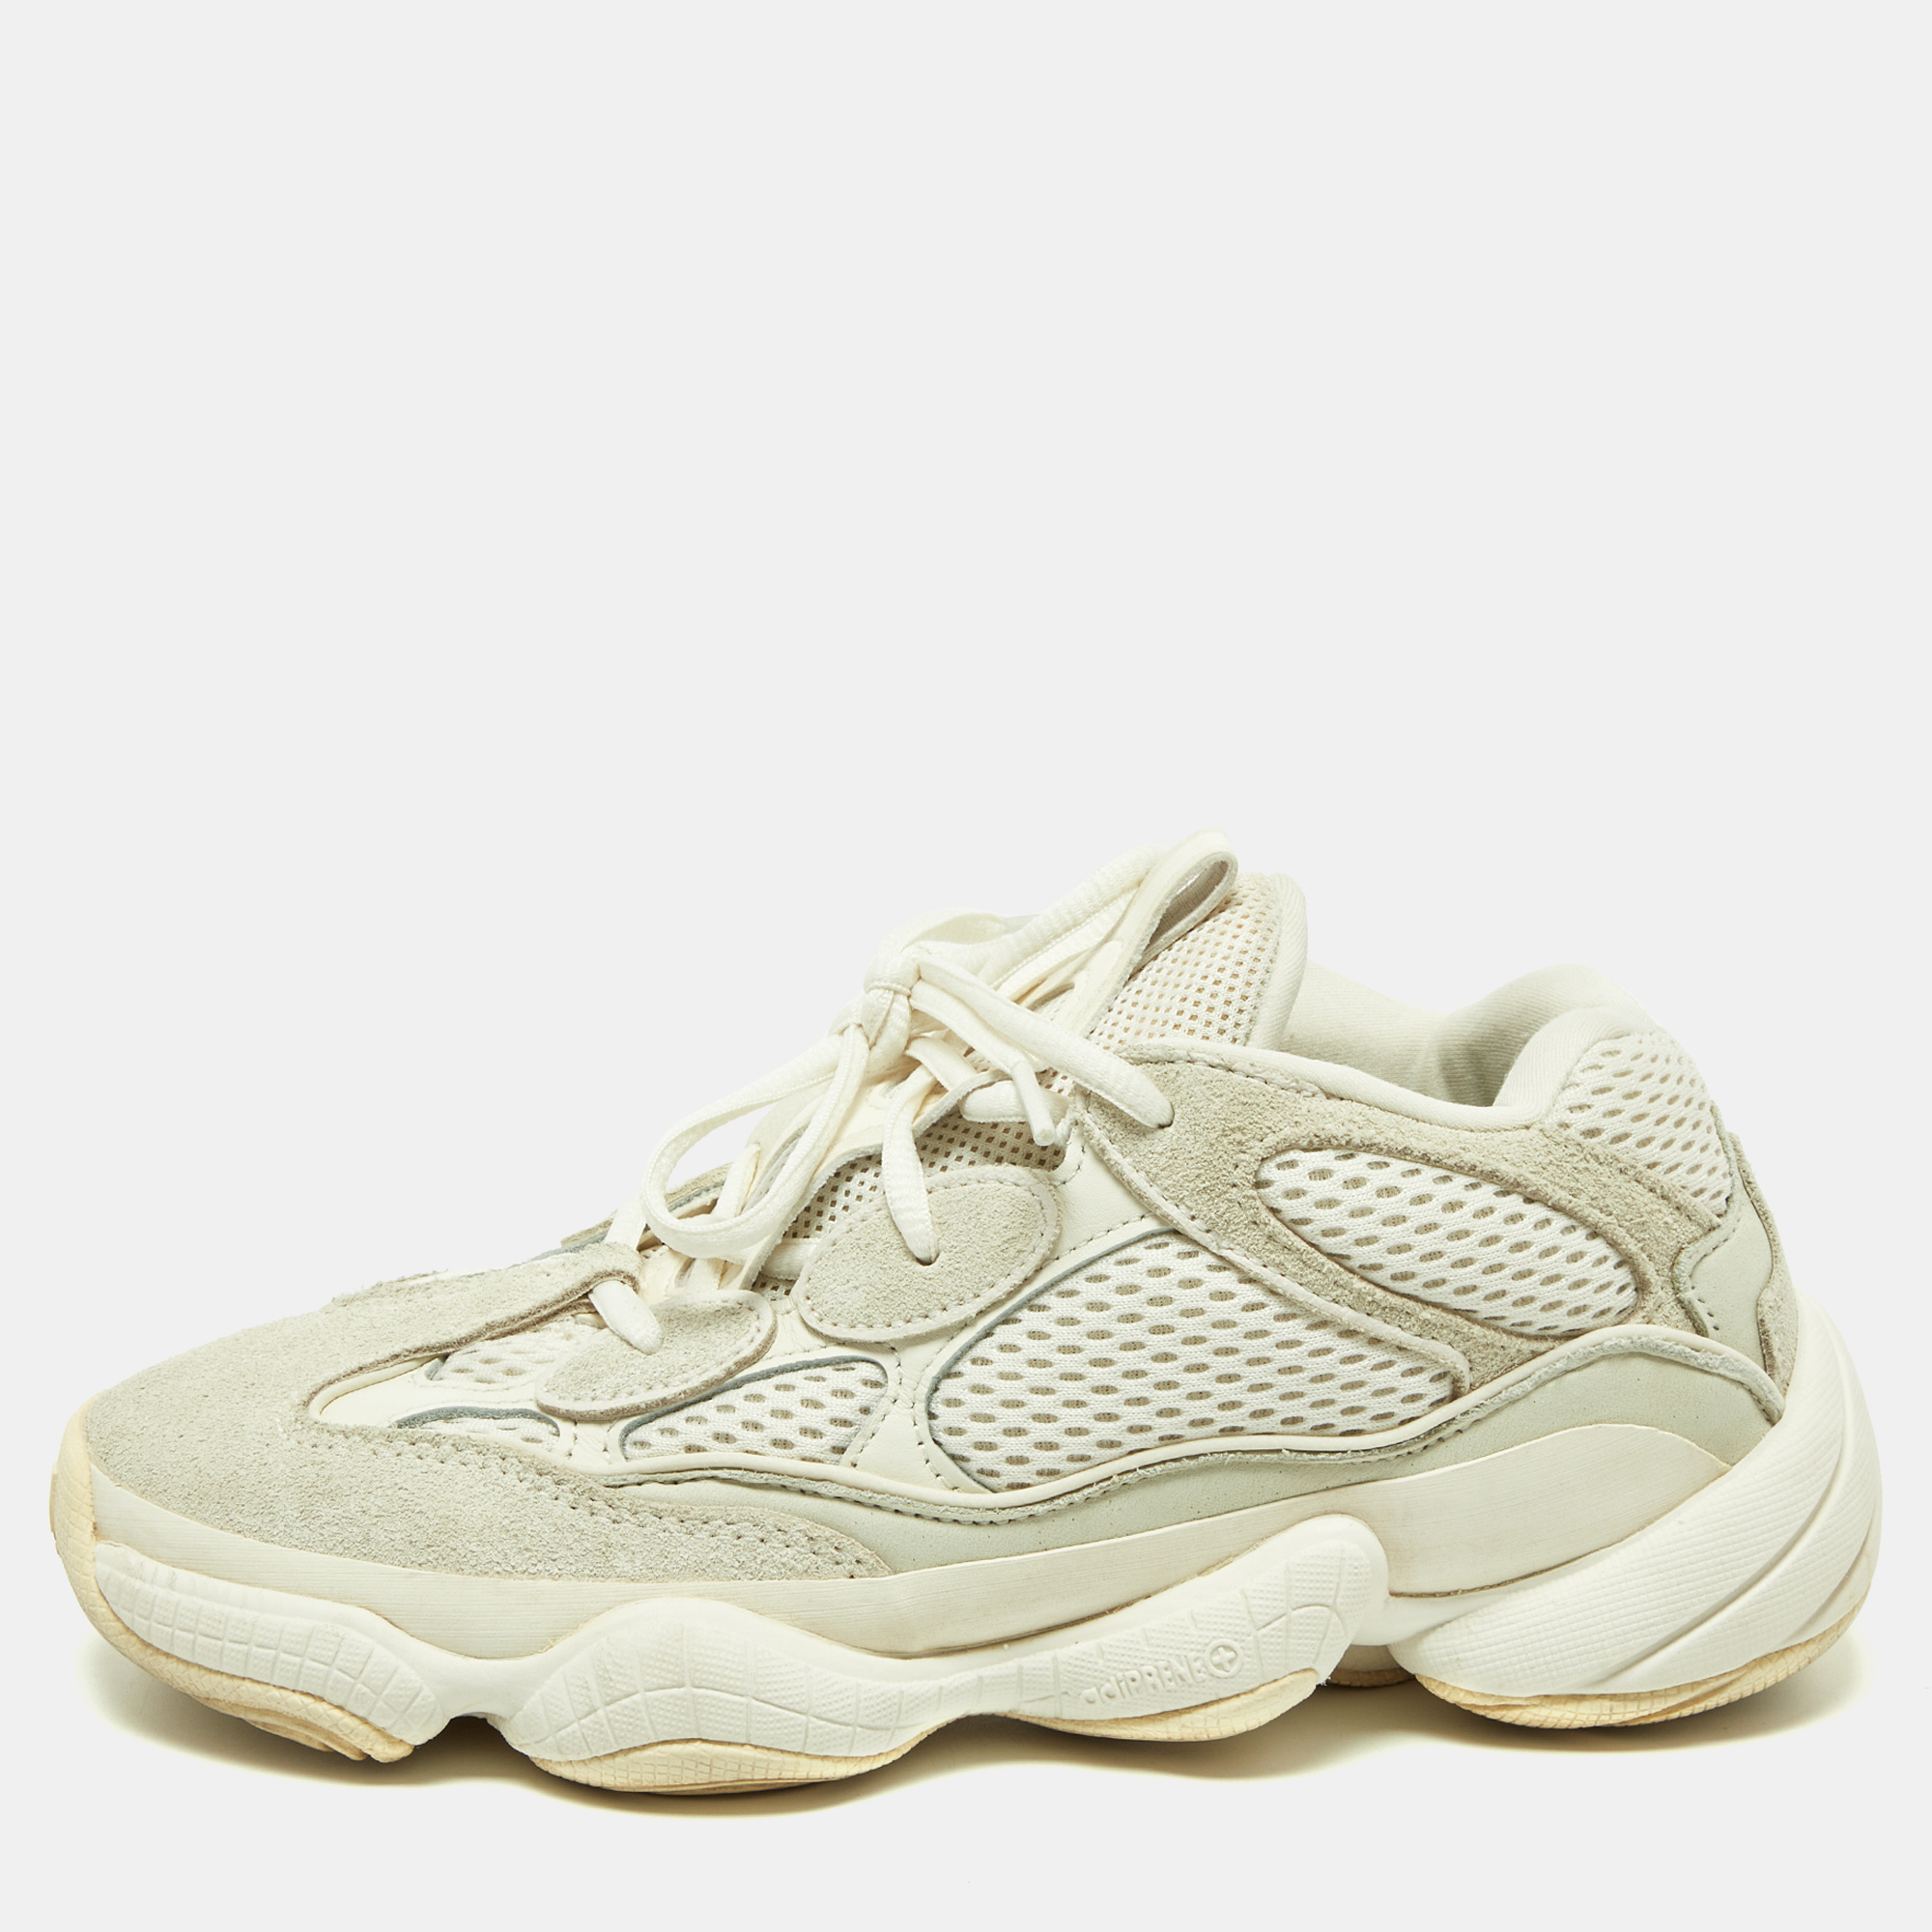 Yeezy X Adidas White Suede And Mesh Yeezy 500 Bone White Sneakers Size 38